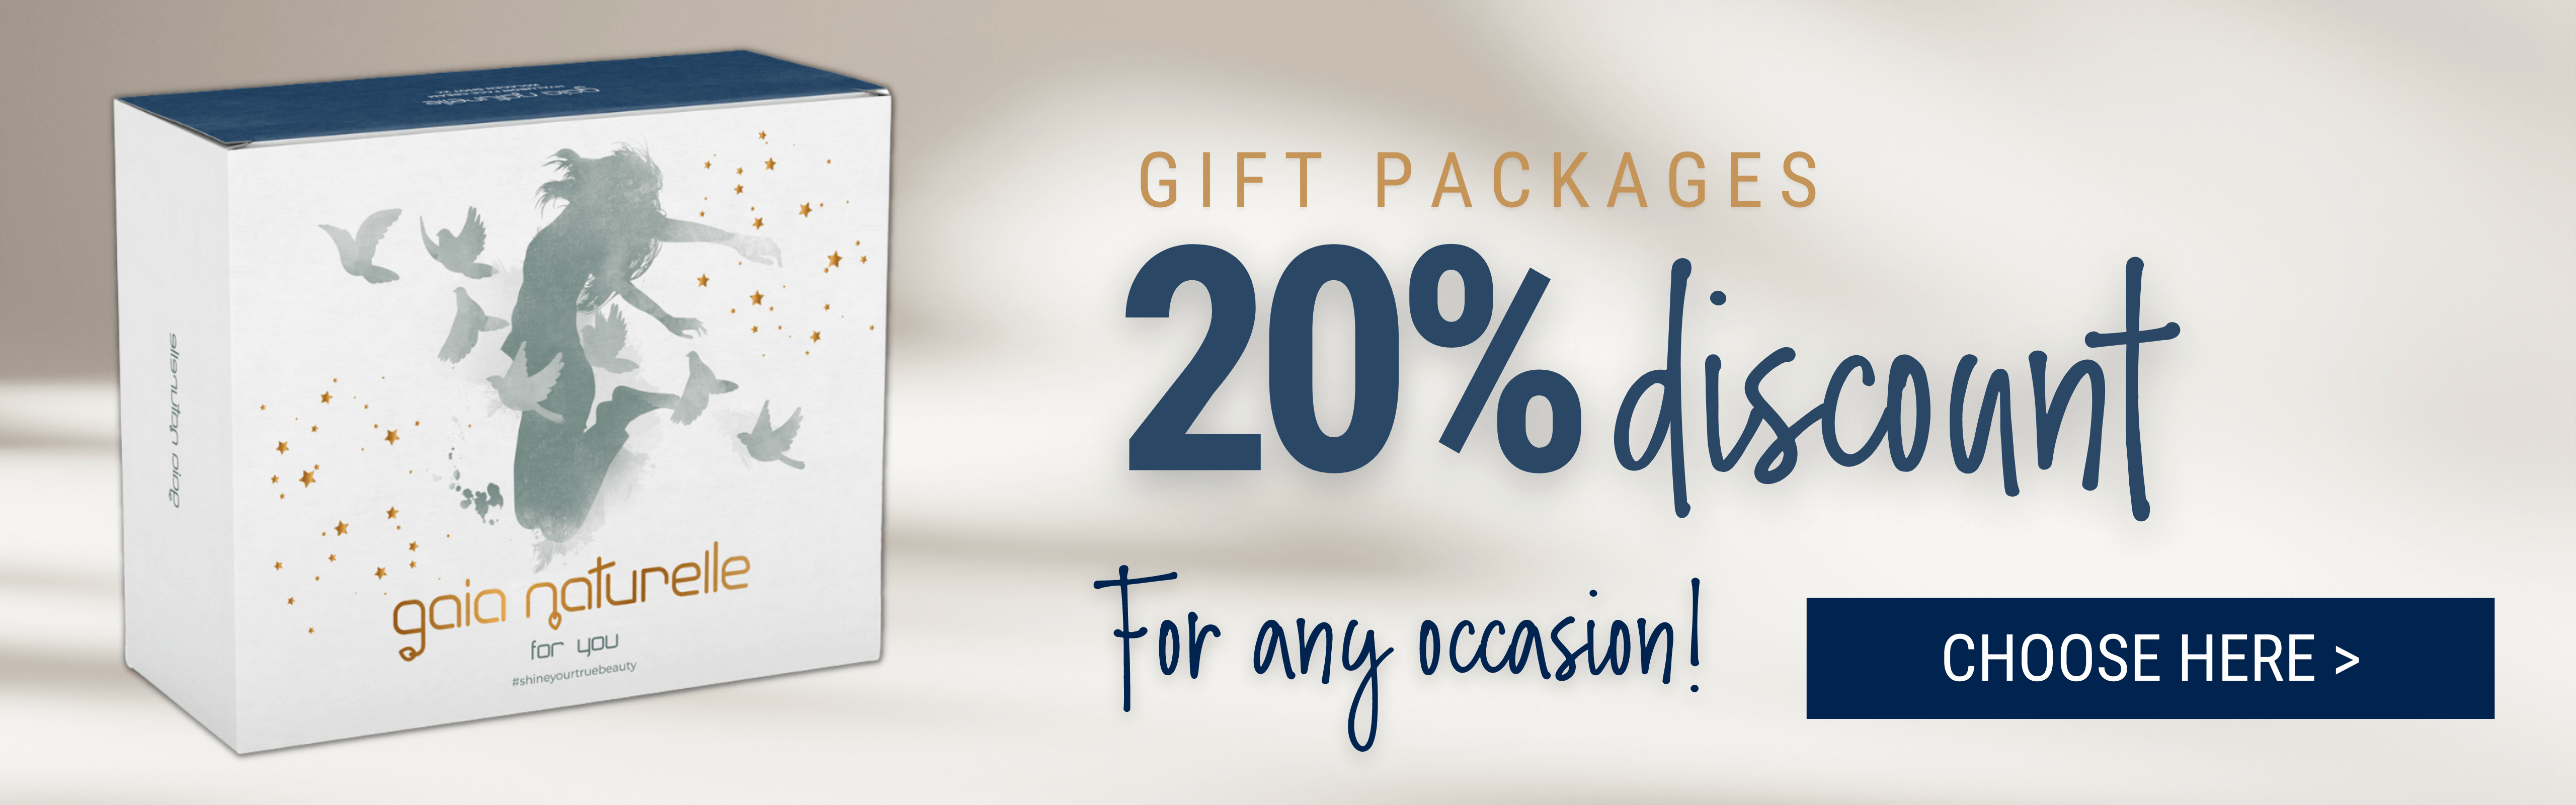 Gift packages -20% off